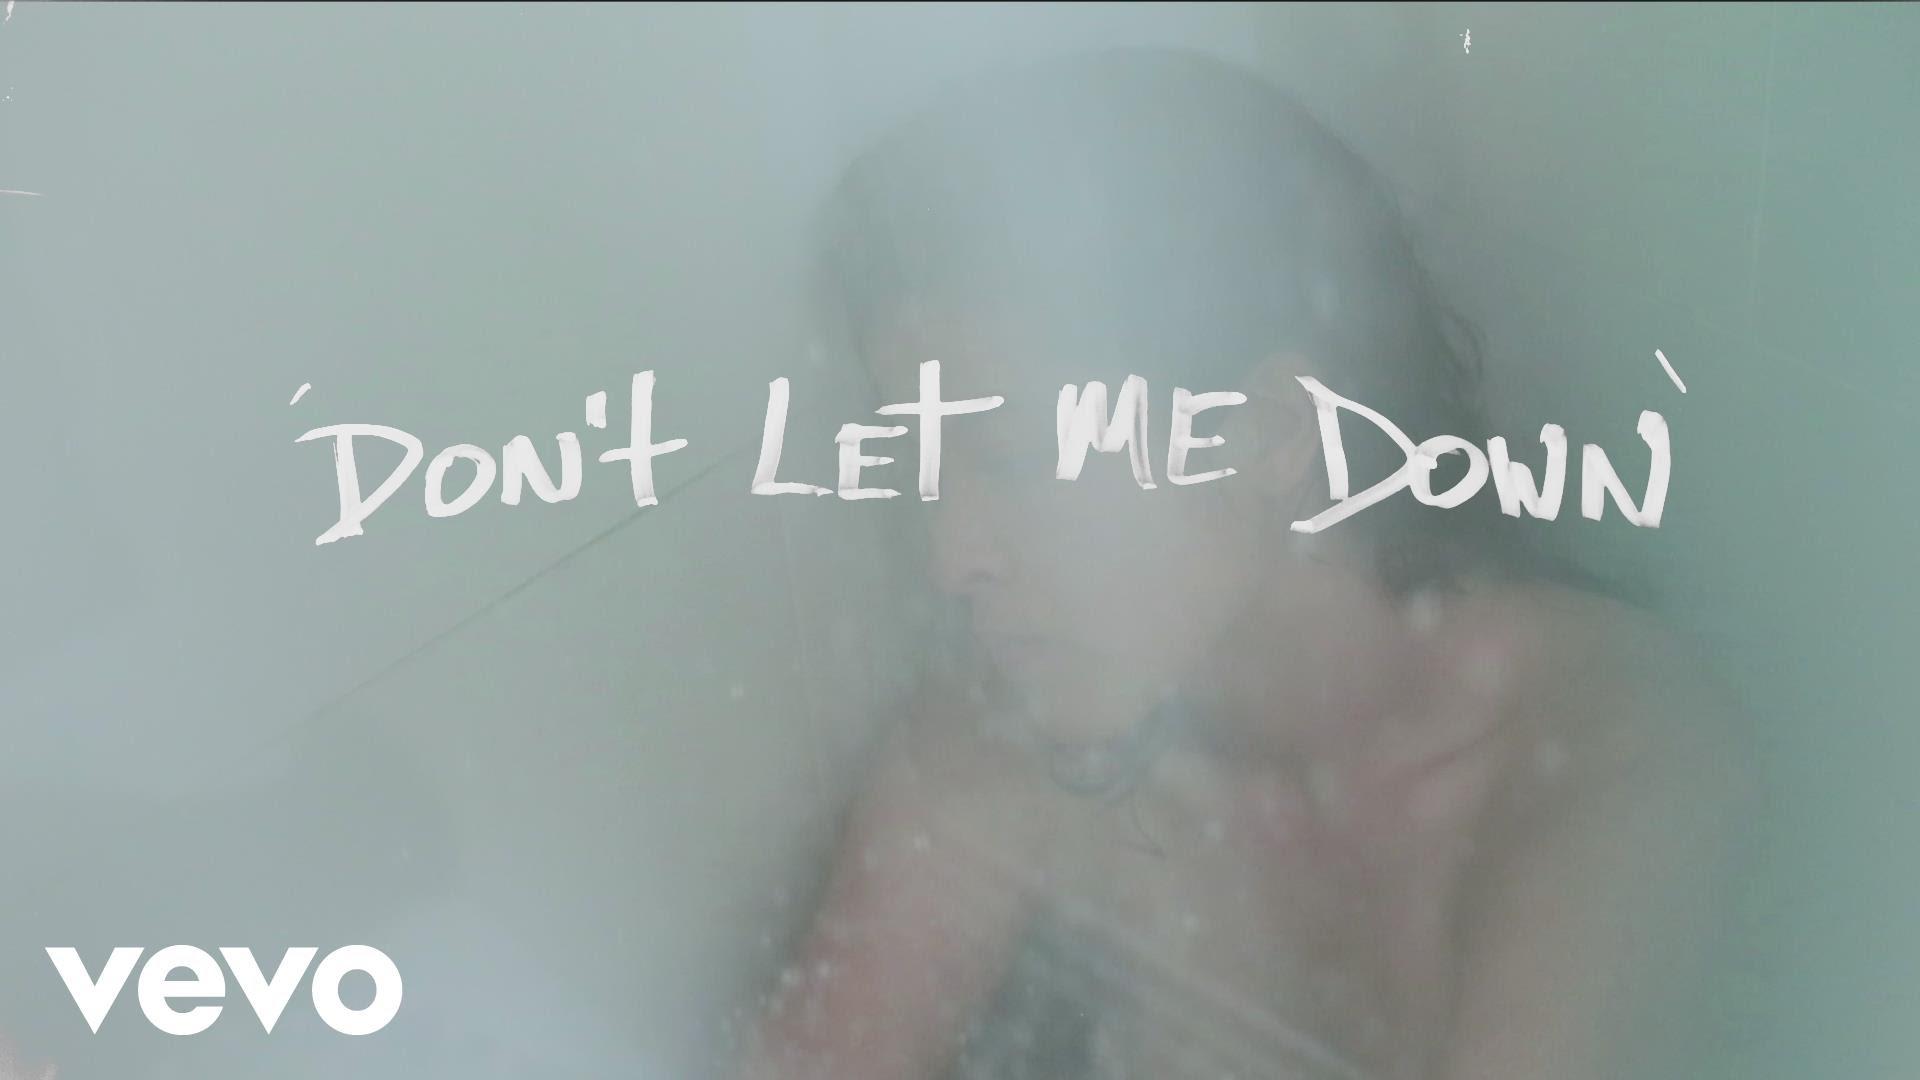 The Chainsmokers- Don’t Let Me Down Music Video and Lyrics